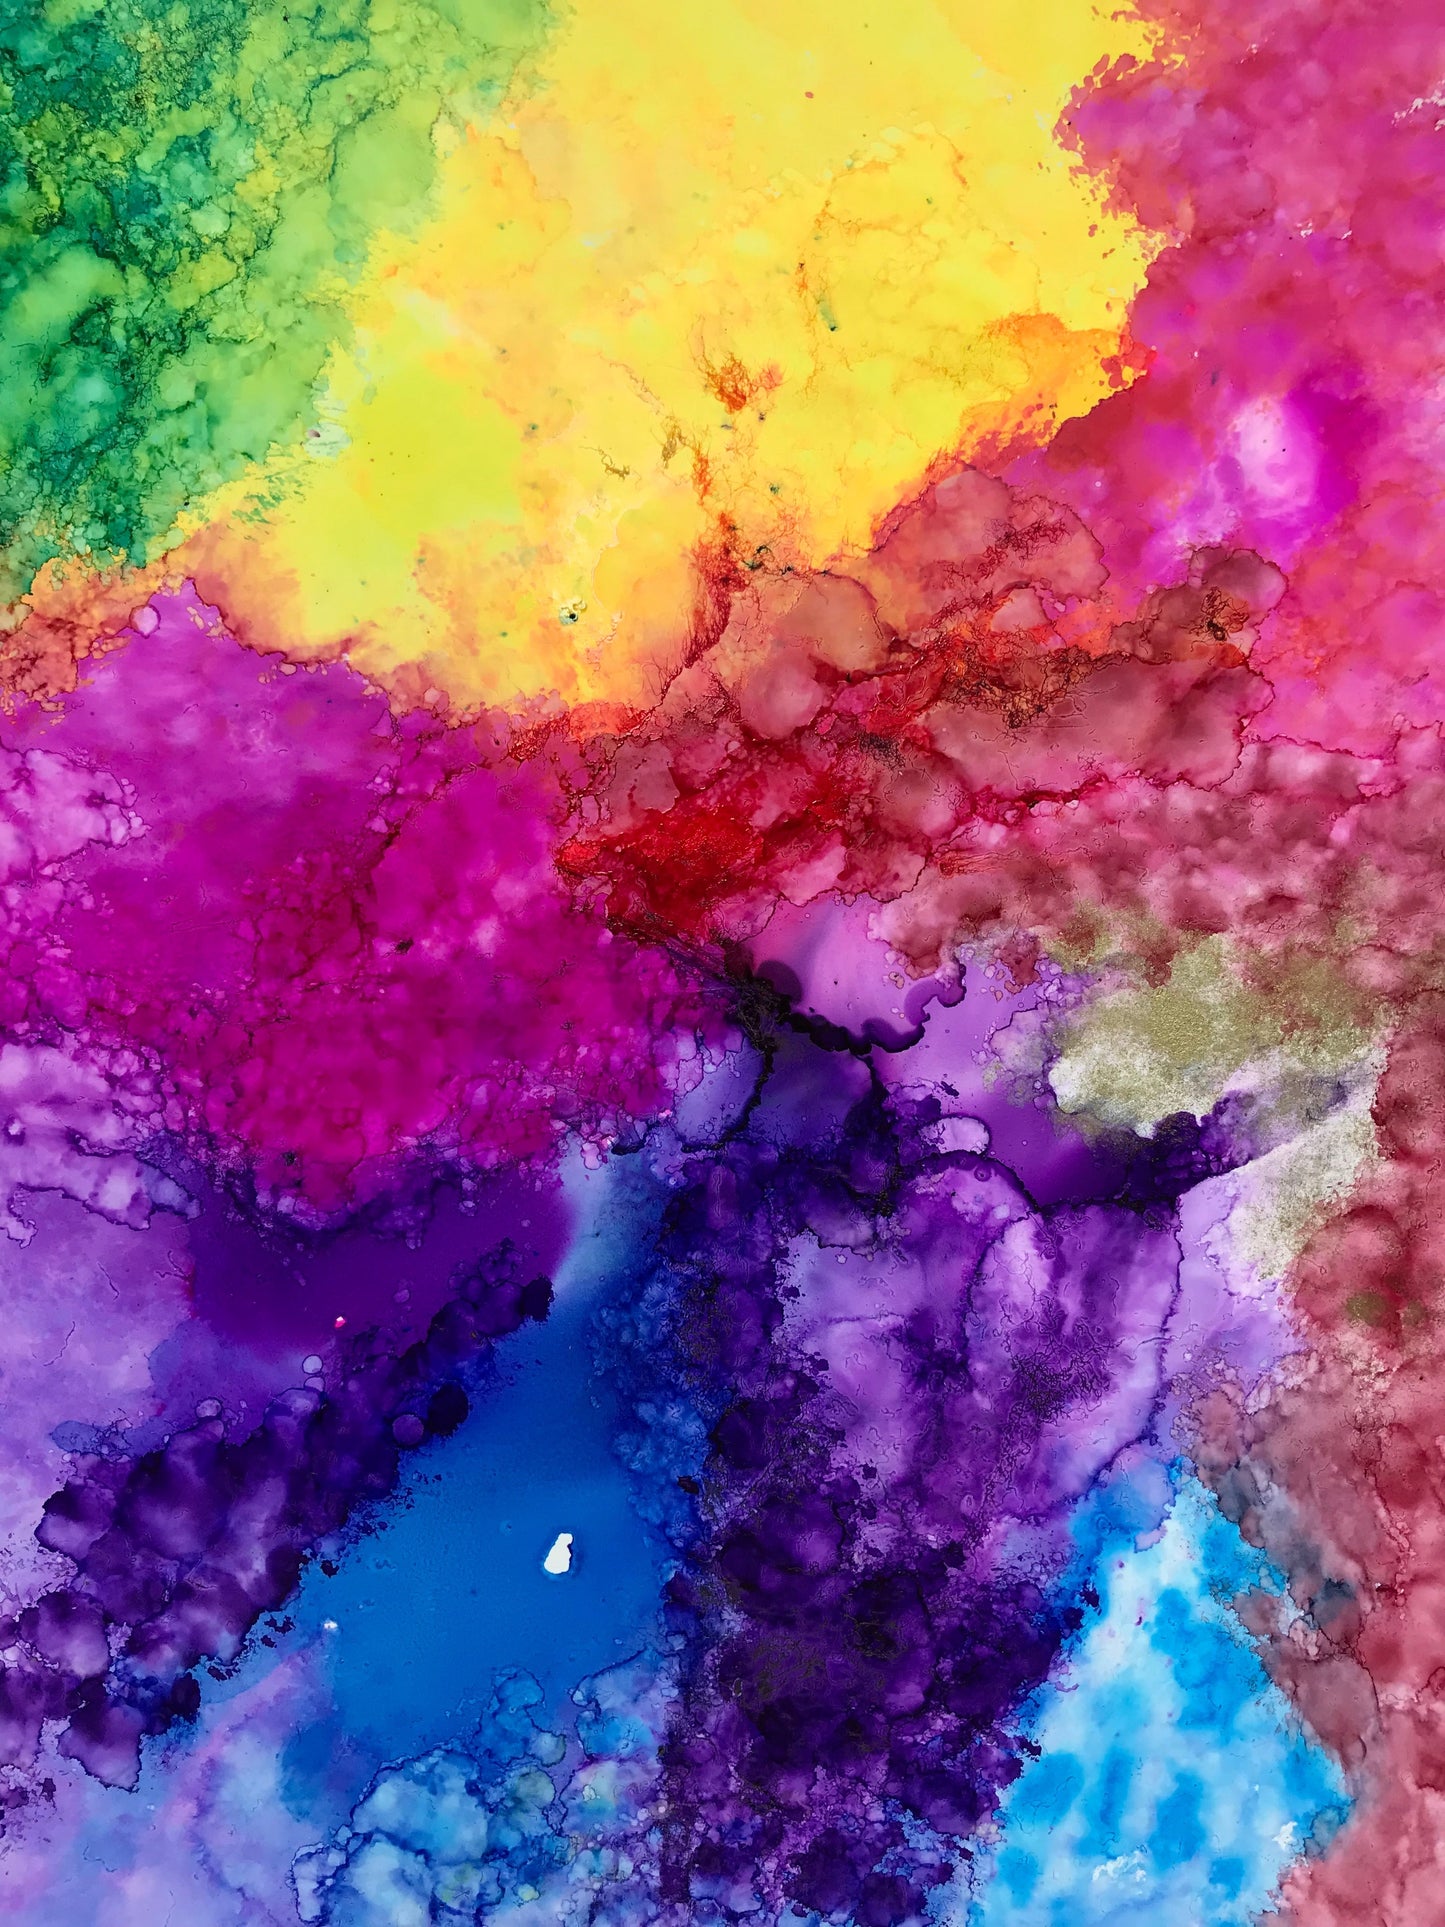 Sat, Mar 25th, 2-4P “Alcohol Inks” Private Kids Painting Party